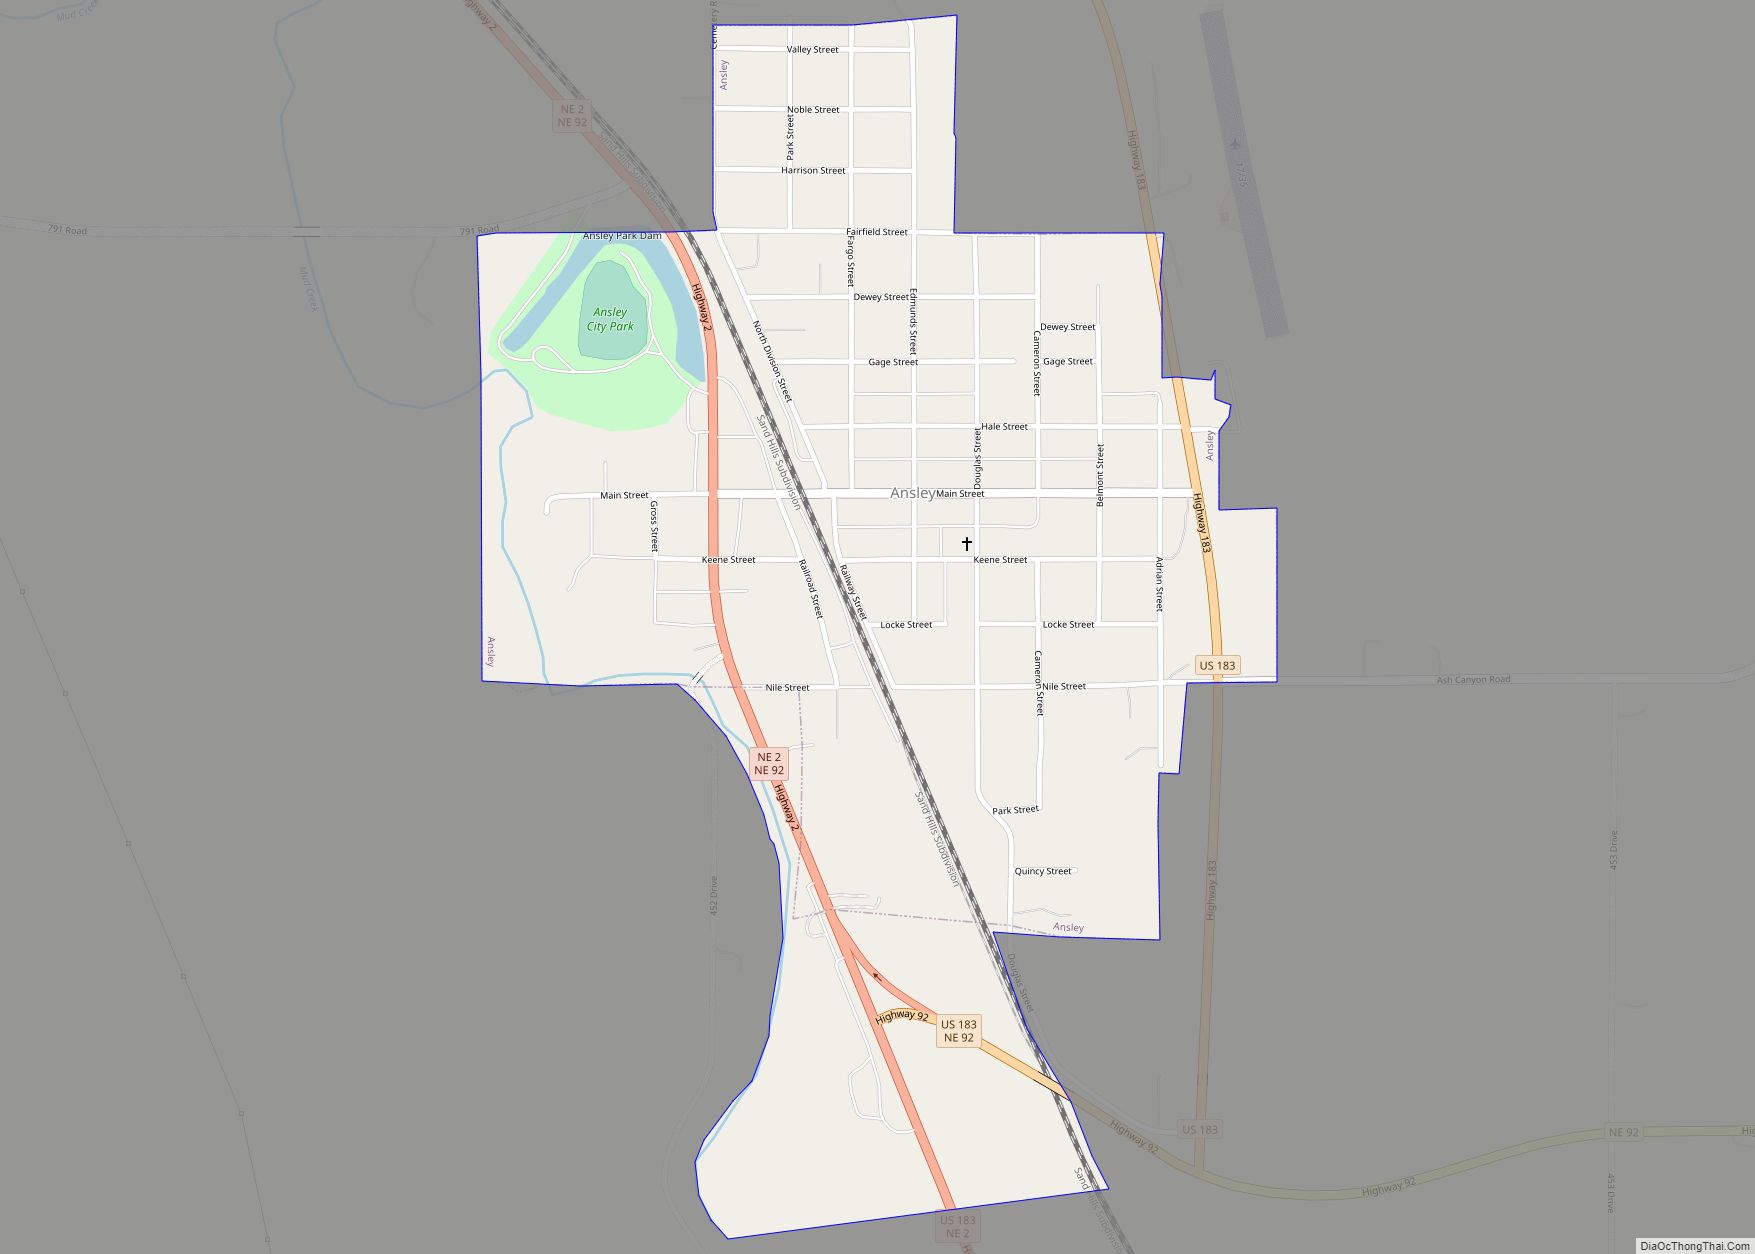 Map of Ansley village